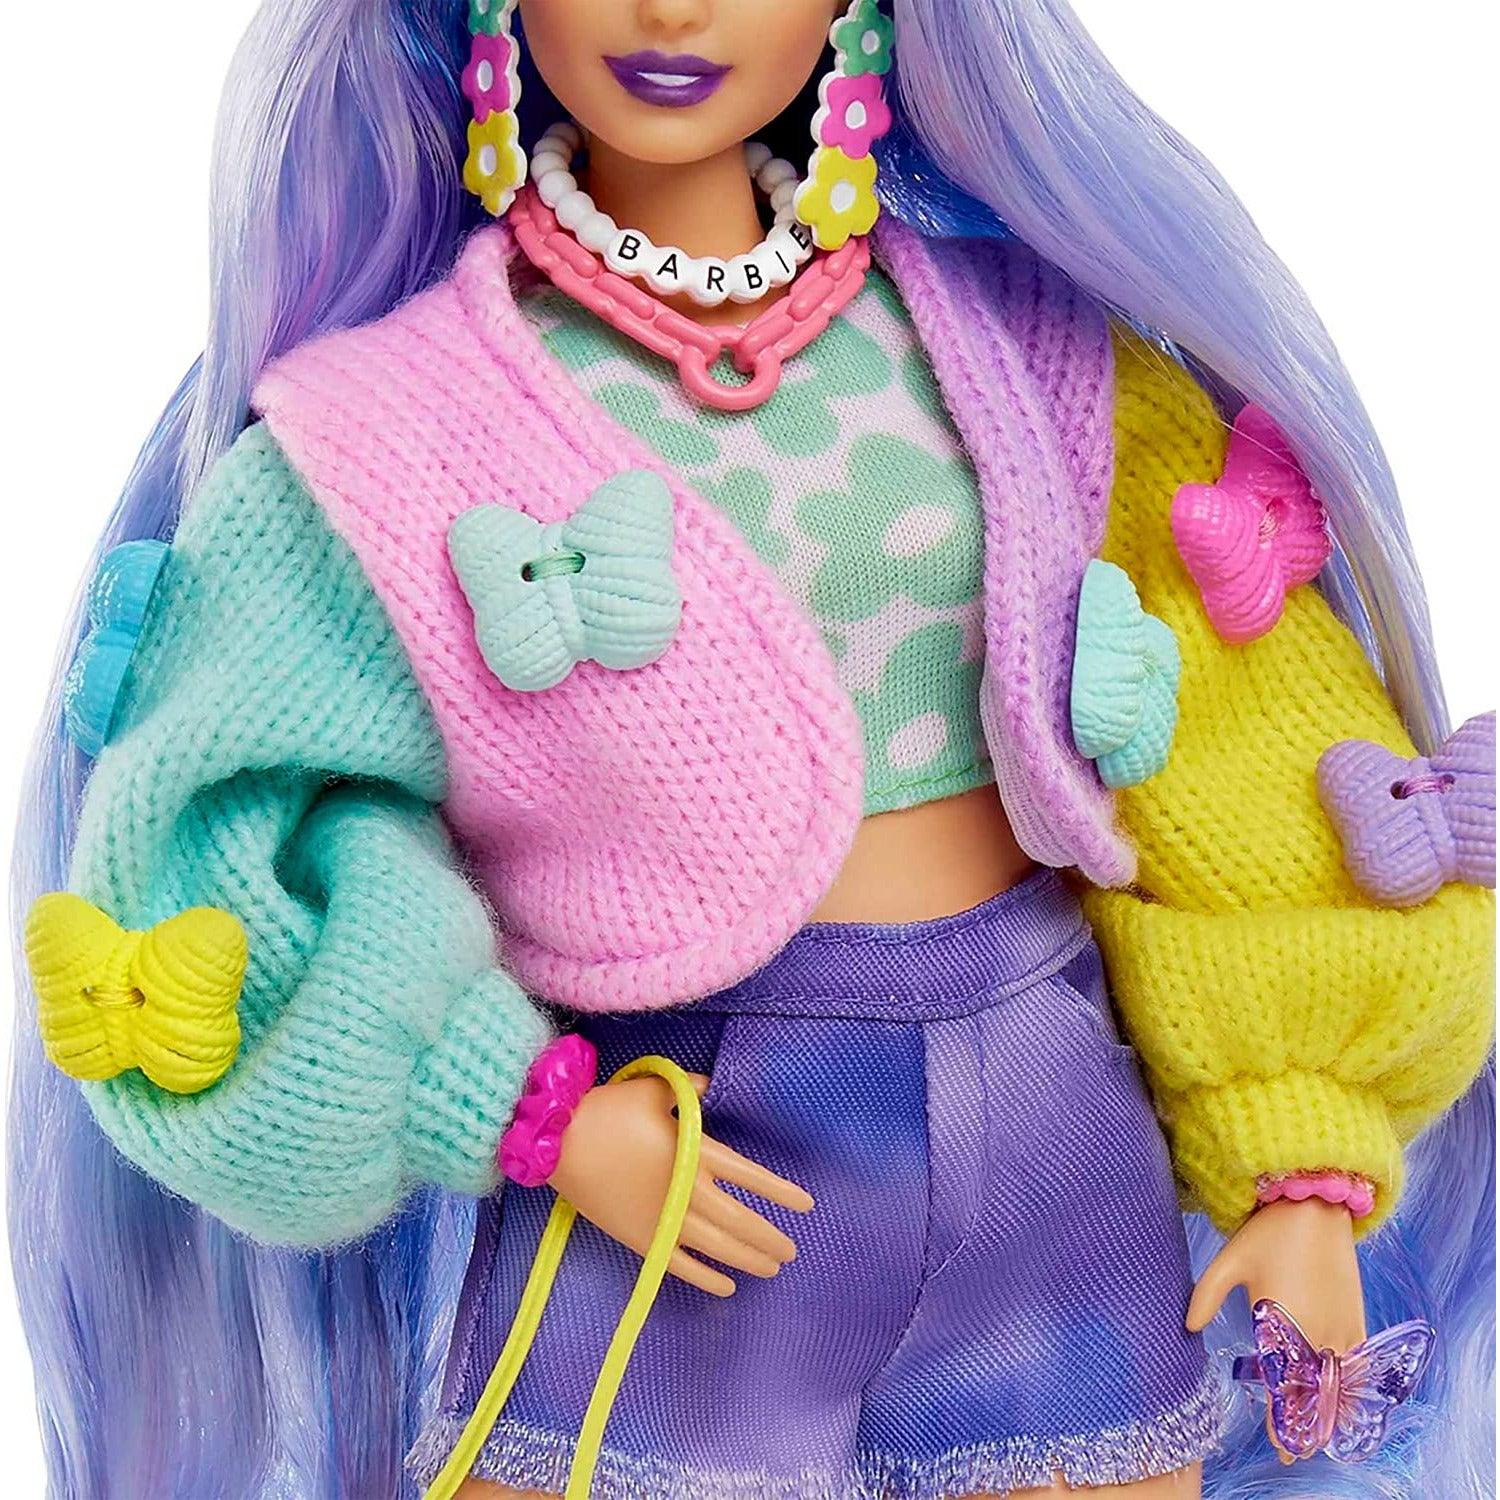 Barbie Extra #20 Doll & Accessories with Wavy Lavender Hair in Colorful Butterfly Sweater & Pink Boots with Pet Koala